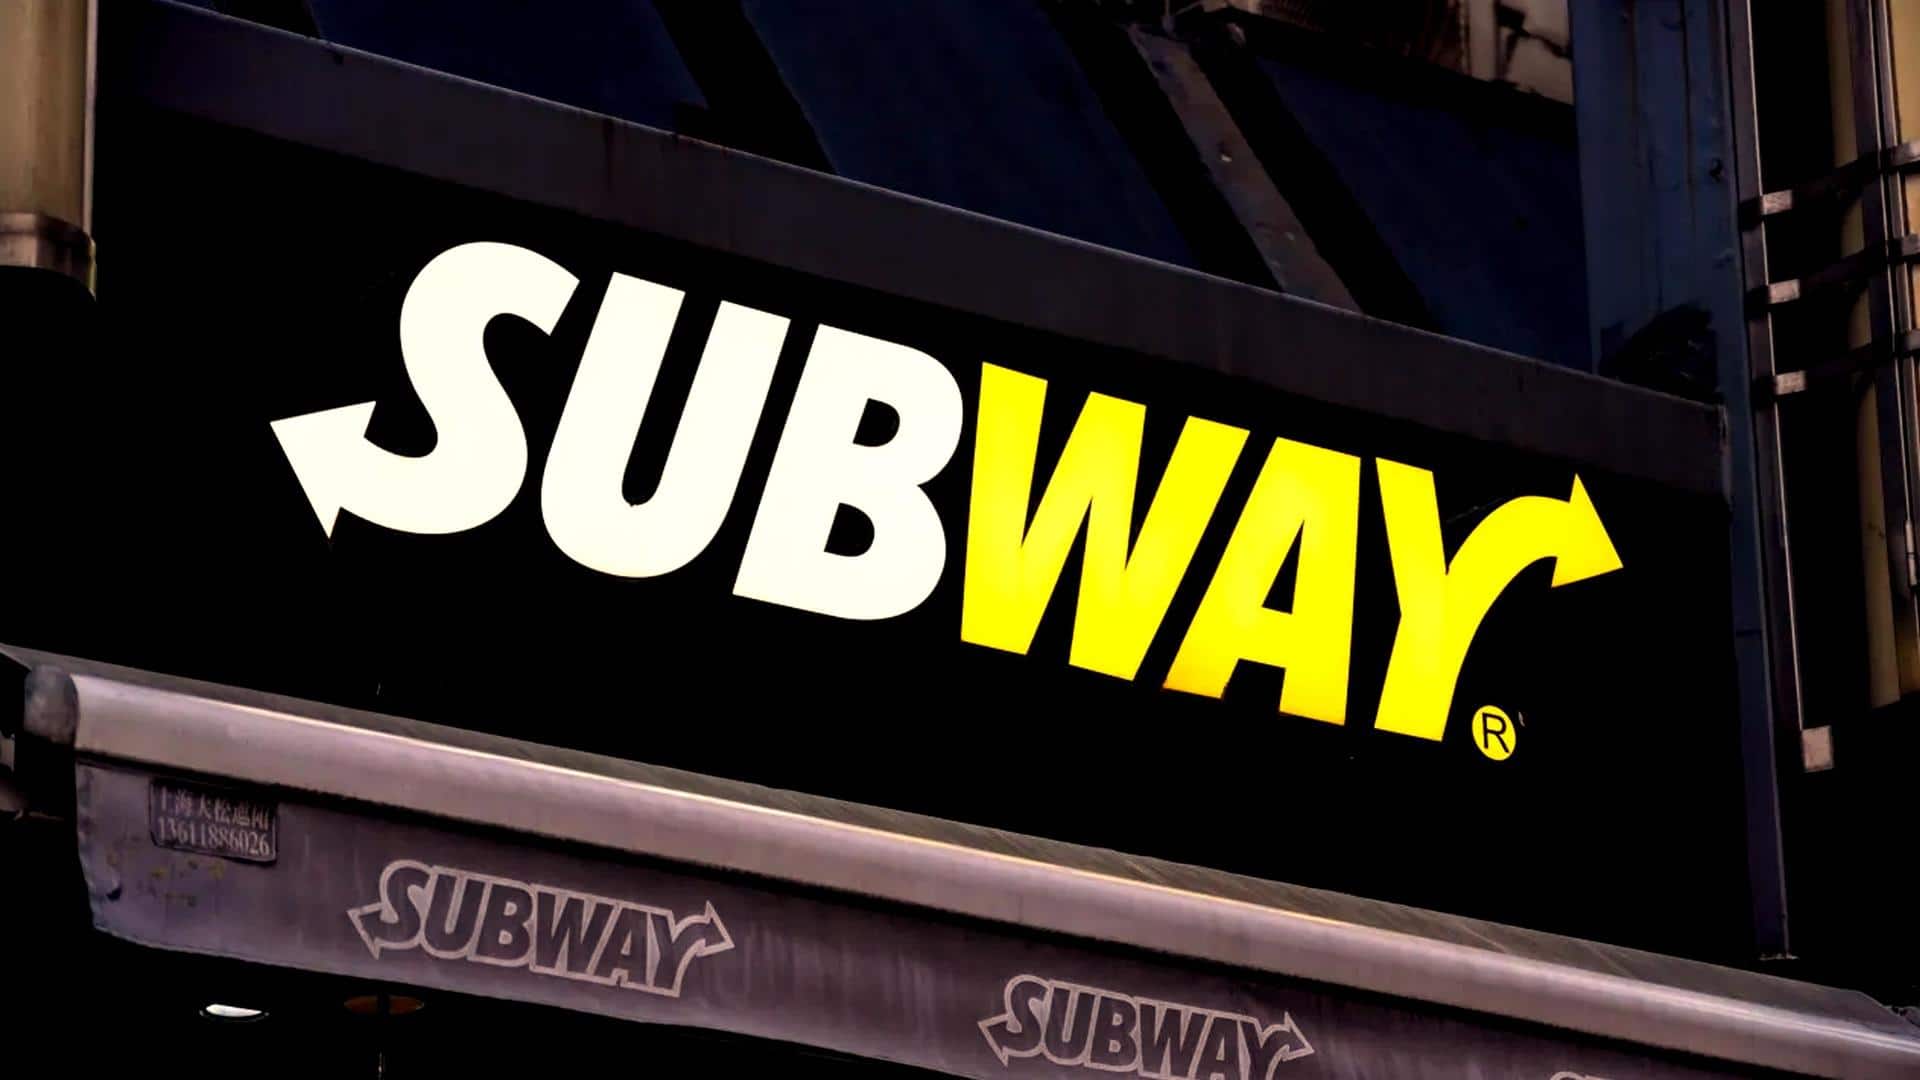 You can get free Subway sandwiches for life. Here's how